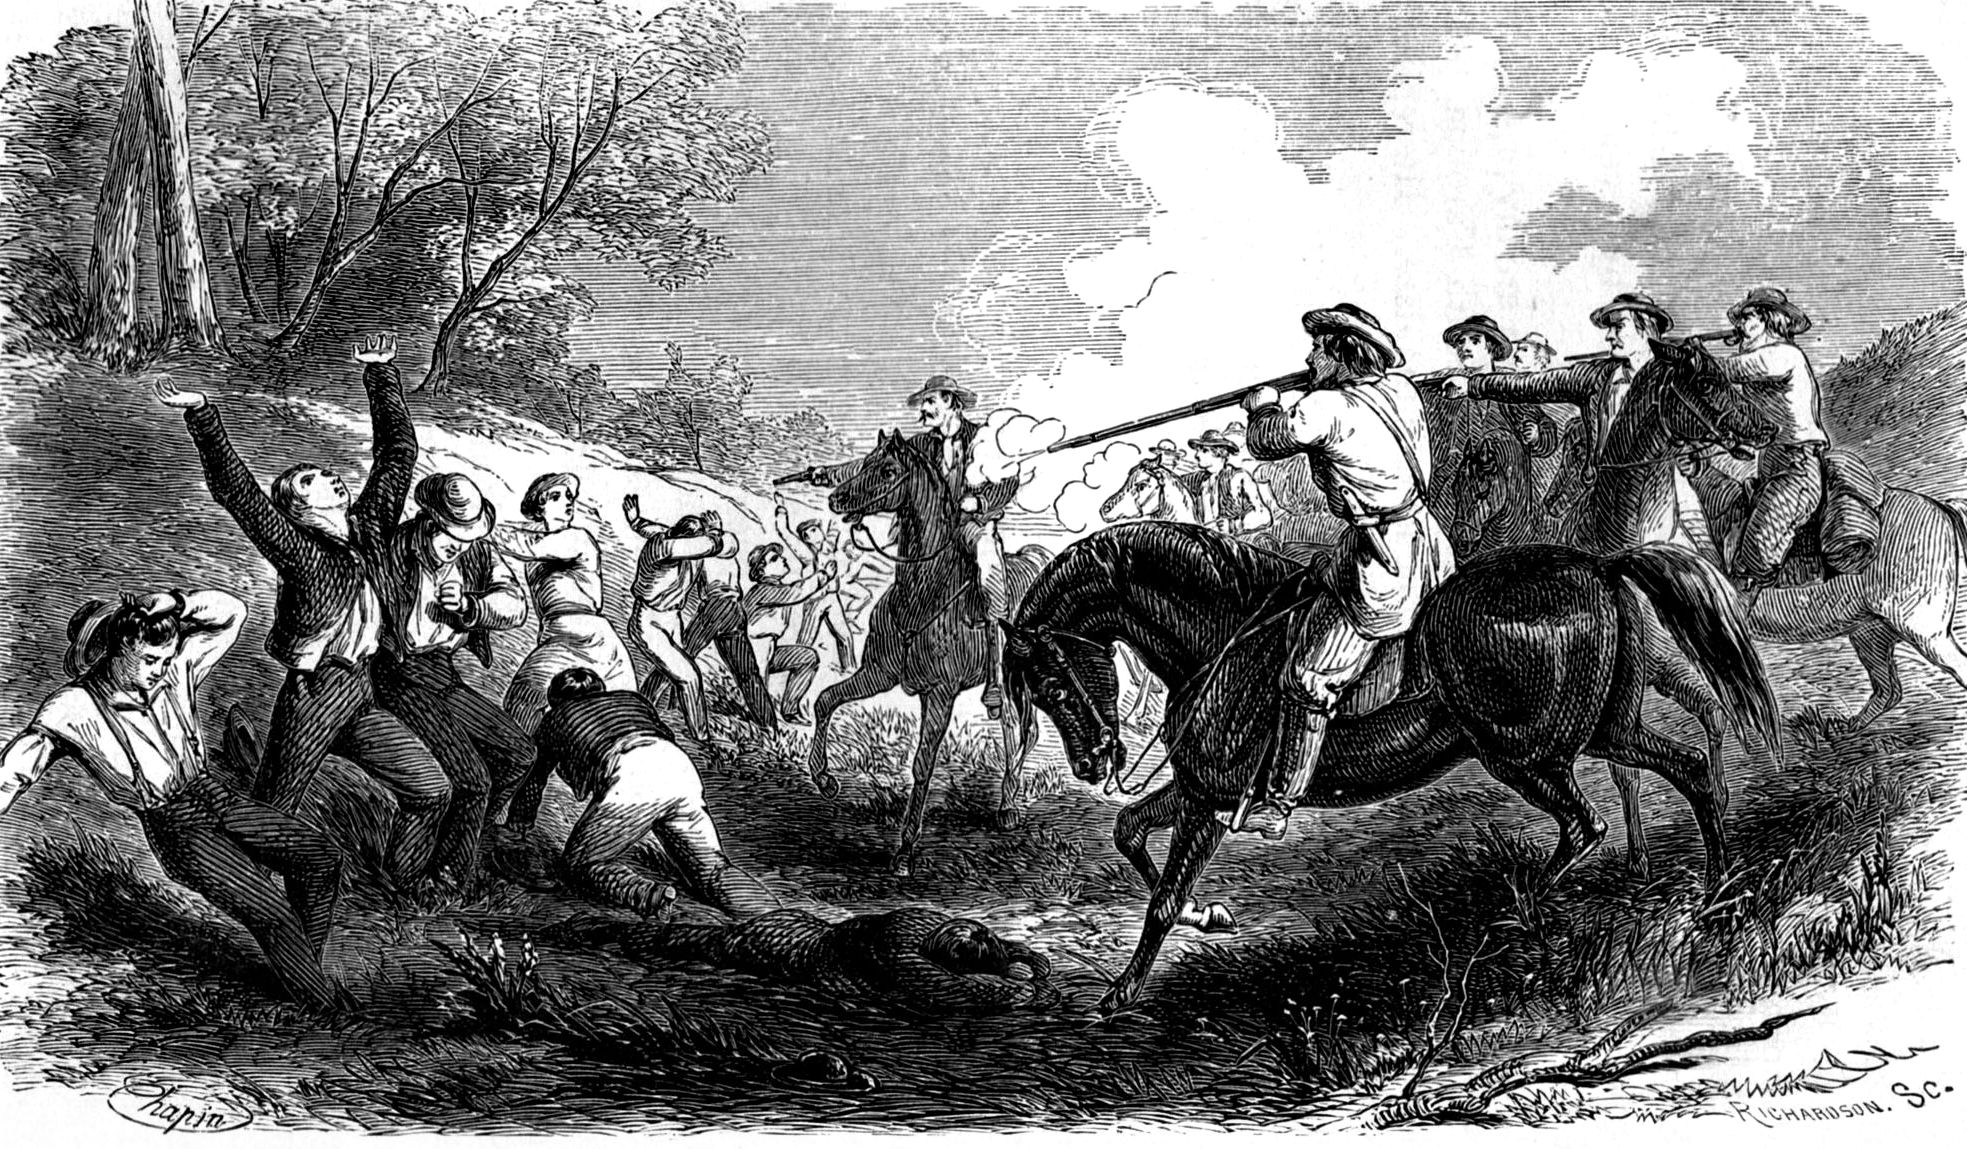 The Marais des Cygnes Massacre was one of the last big acts of violence during Bleeding Kansas. Charles Hamilton, a pro-slavery man who had been run out of the territory, led 30 men into the village of Trading Post, Kansas, on May 19, 1858. They forced 11 unarmed free-staters into a ravine and shot them—killling five and wound five others. One man escaped injury by pretending to be dead. 